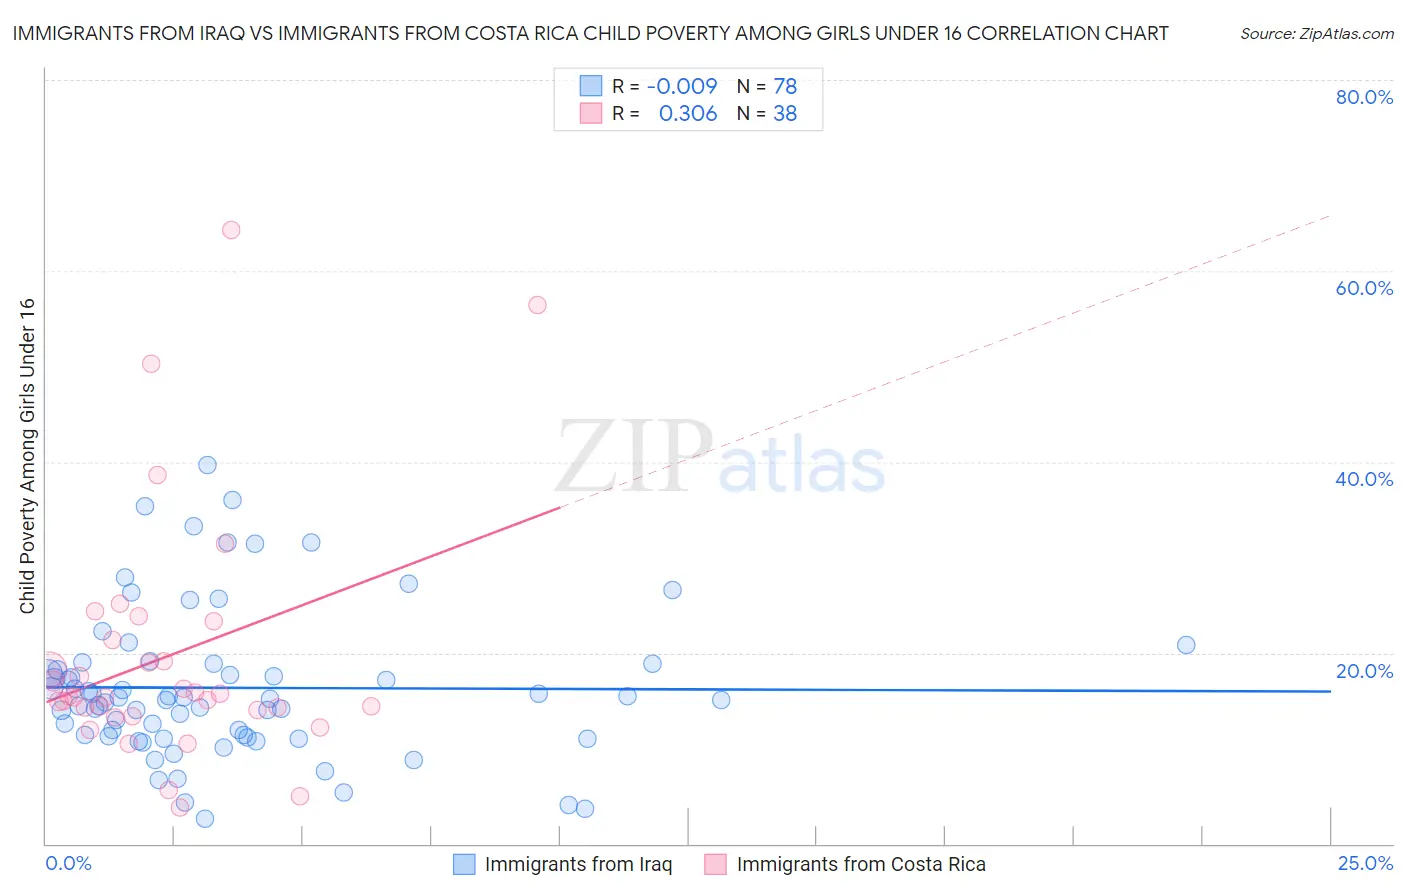 Immigrants from Iraq vs Immigrants from Costa Rica Child Poverty Among Girls Under 16